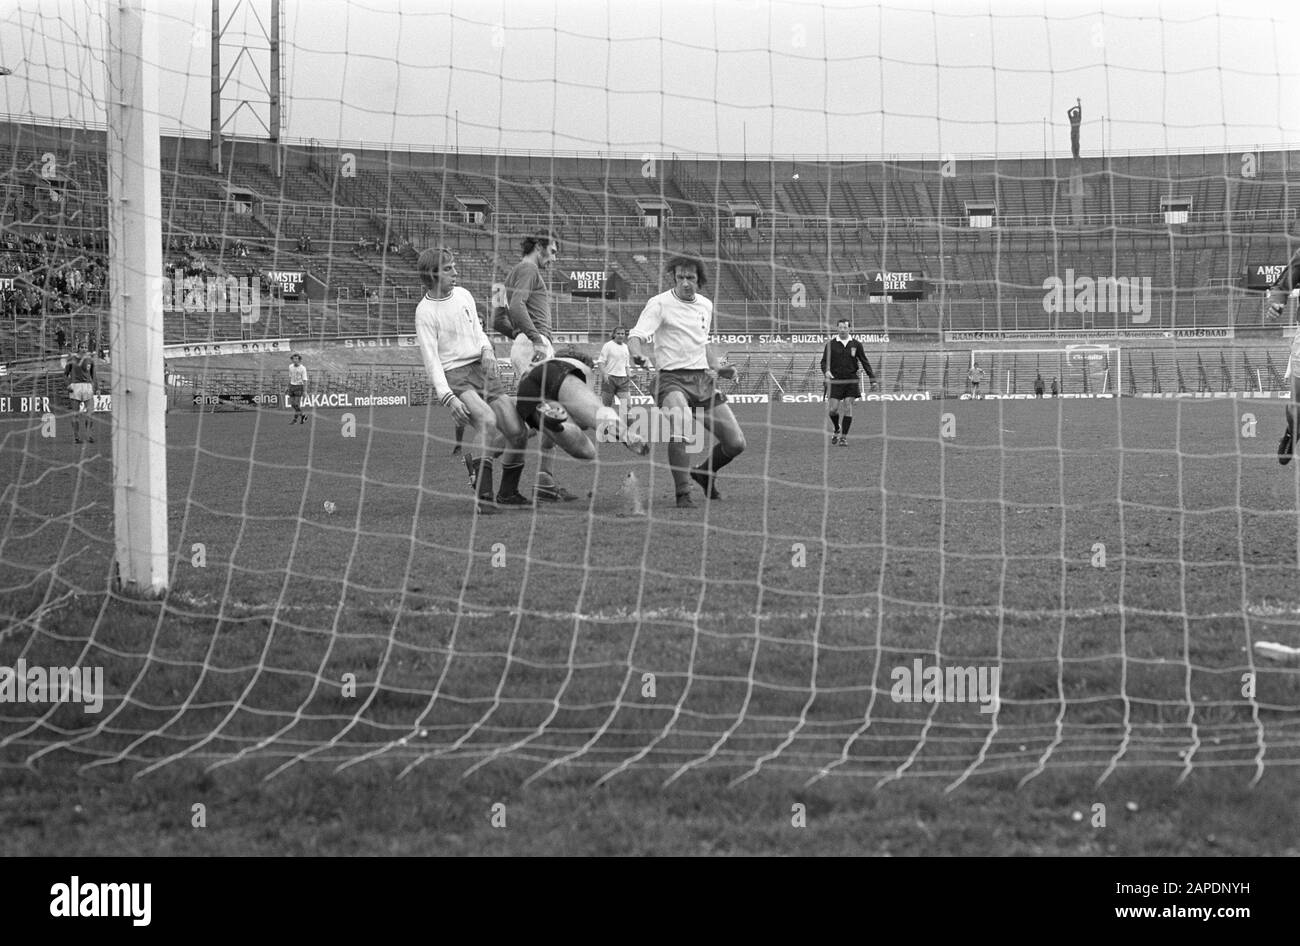 Amsterdam against AZ67 0-3, number 25 game moment, number 2 Kees Kist (kop)  Date: 25 March 1973 Location: Amsterdam, Noord-Holland Keywords: sport,  football Personal name: Kist, Kees Stock Photo - Alamy